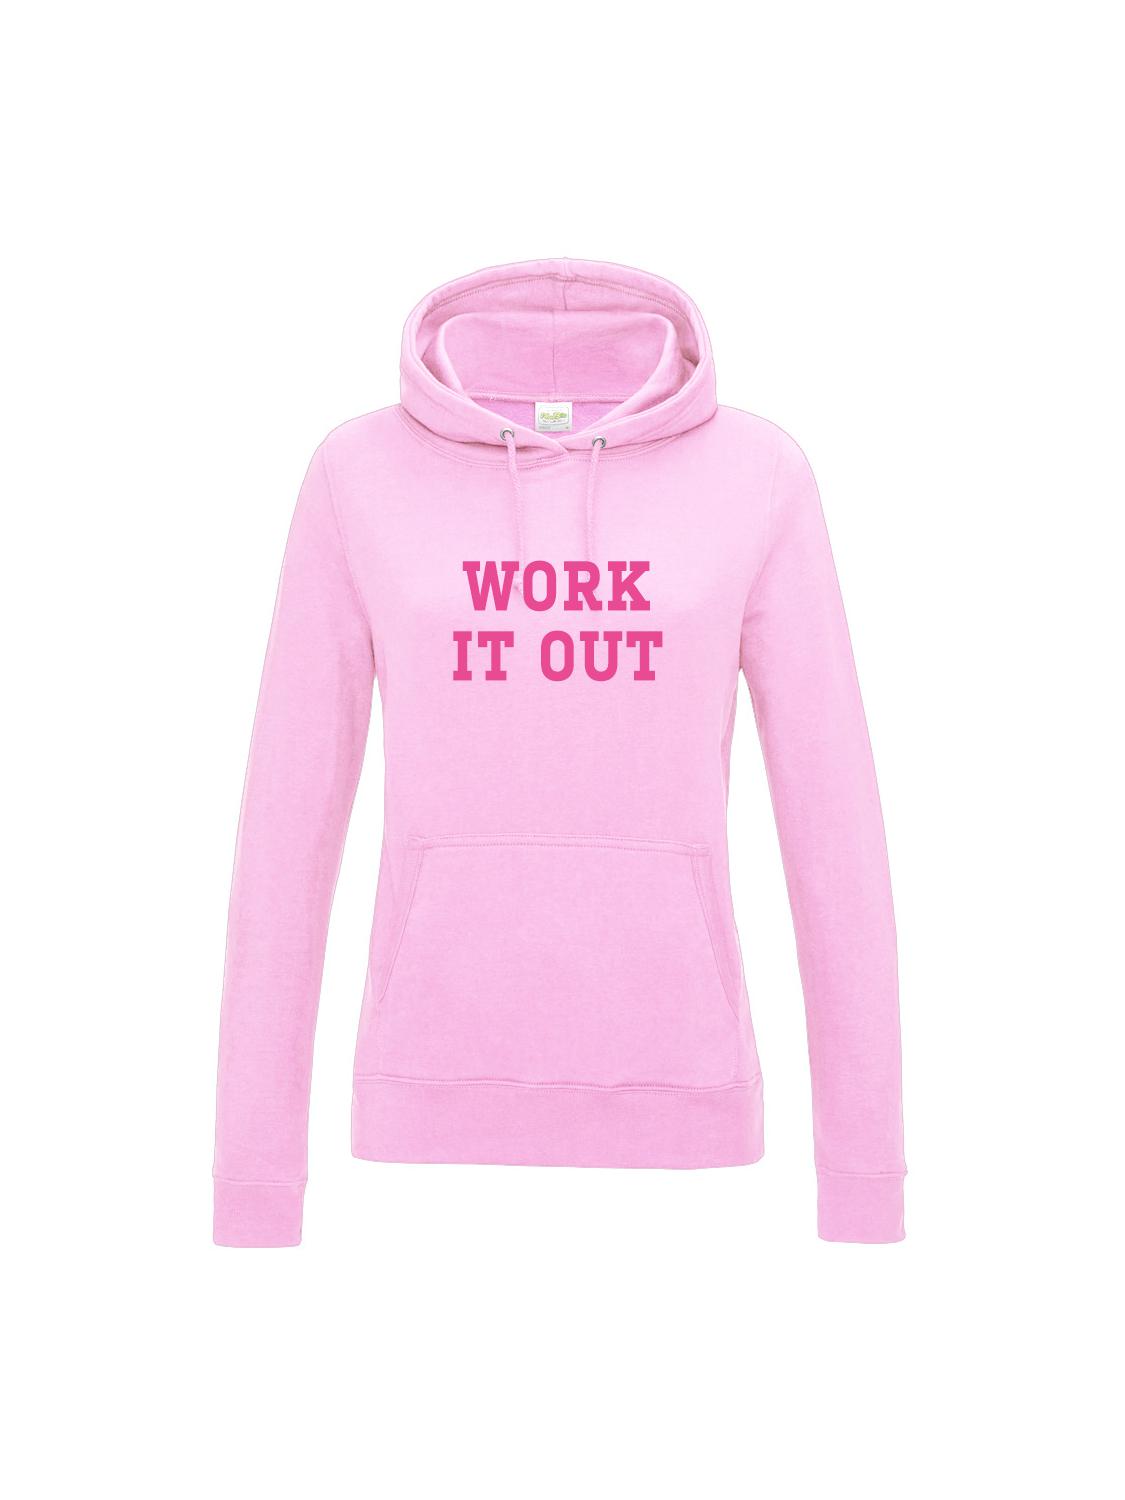 WORK IT OUT hoodie